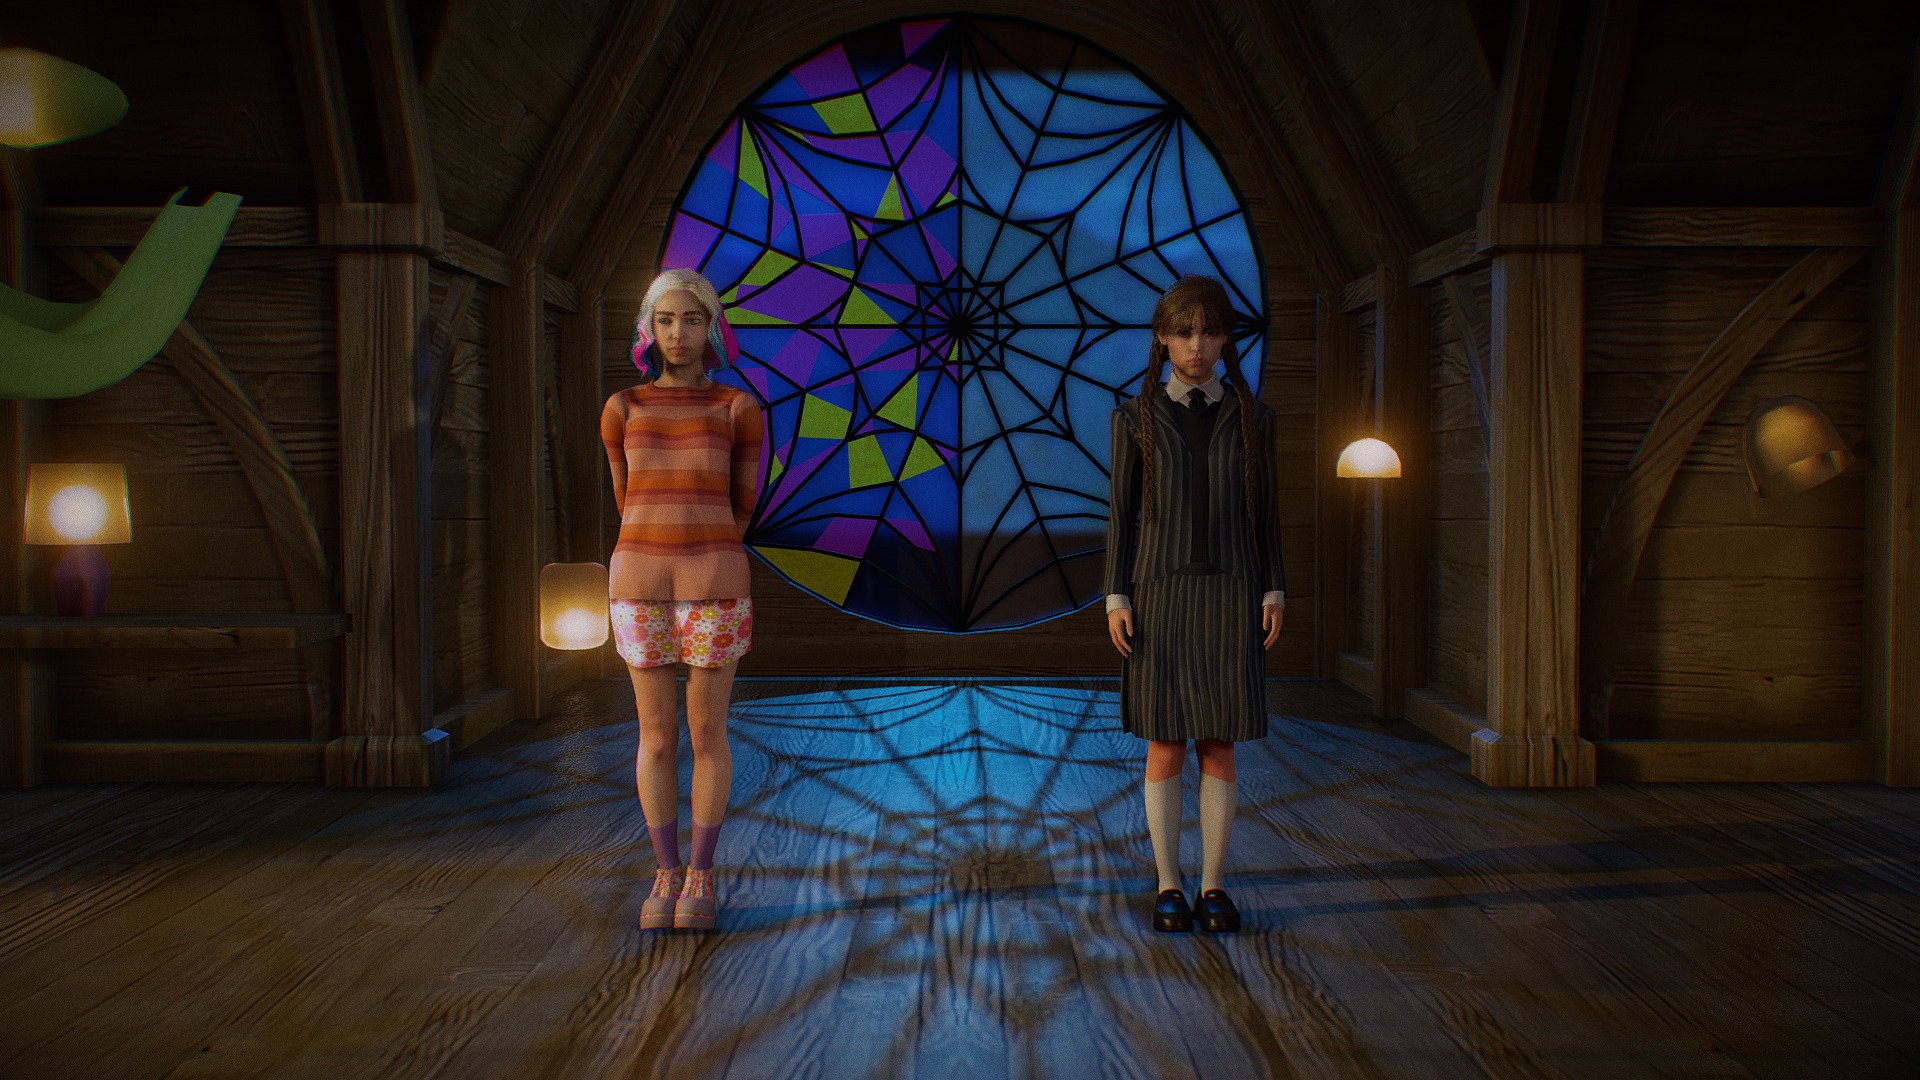 * PLEASE DOWNLOAD THE RAR INSIDE THE ADDITIONAL FILES!!!
Wednesday Addams and Enid Sinclair. Nevermore Academy bedroom. Model in Blender file. Fully rigged. SSS subsurface scattering. mixamo bone names for animation. 




Includes Bedroom with lights. Shaders inside the additional RAR file.


Eevee and Cycles ready!




Exporting the FBX for mixamo: 






Transform tab: check &ldquo;apply transform